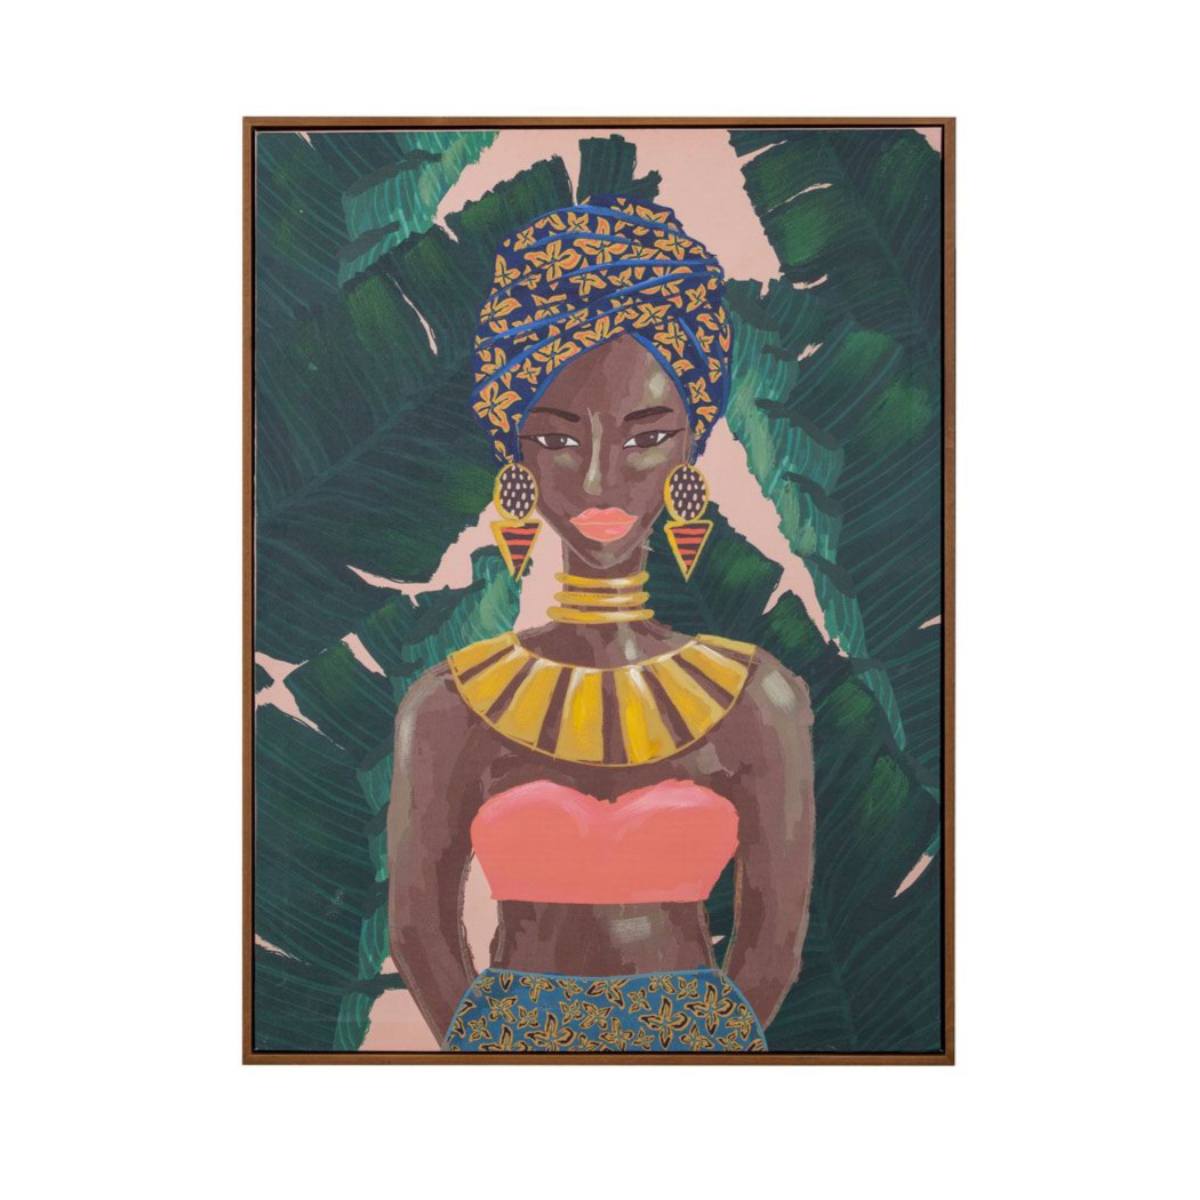 Vibrant Nia artwork featuring a colorful woman among tropical leaves in a 60x80cm timber look frame.